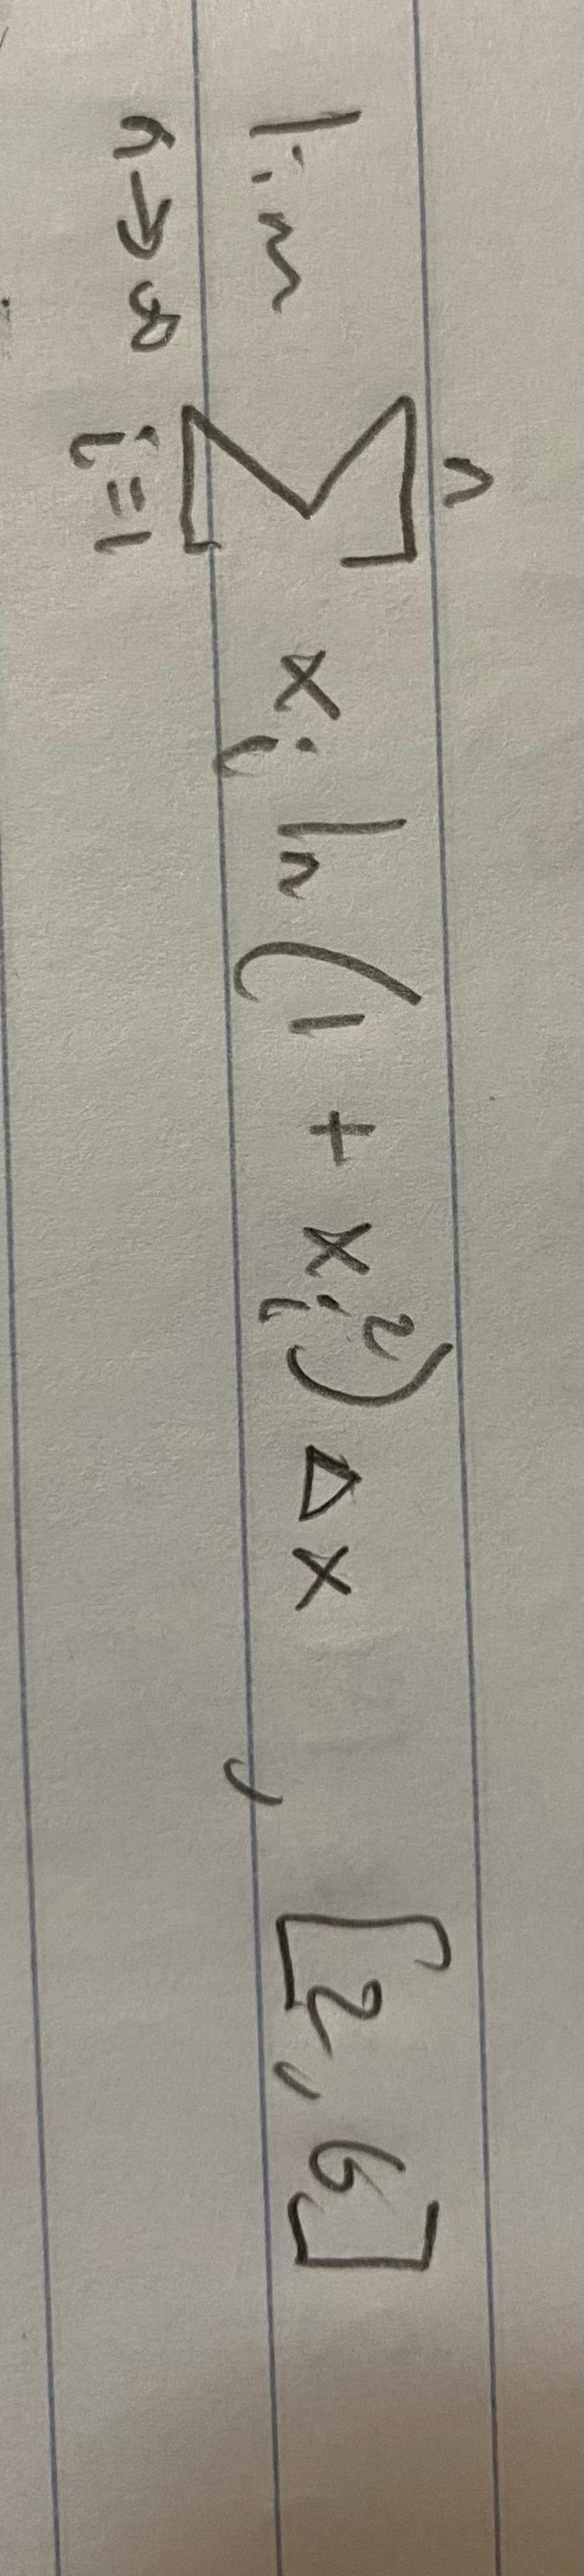 How Do I Turn This Limit Into A Definite Integral? Could You Go Step By Step Please(The Xi's Are "x Sub